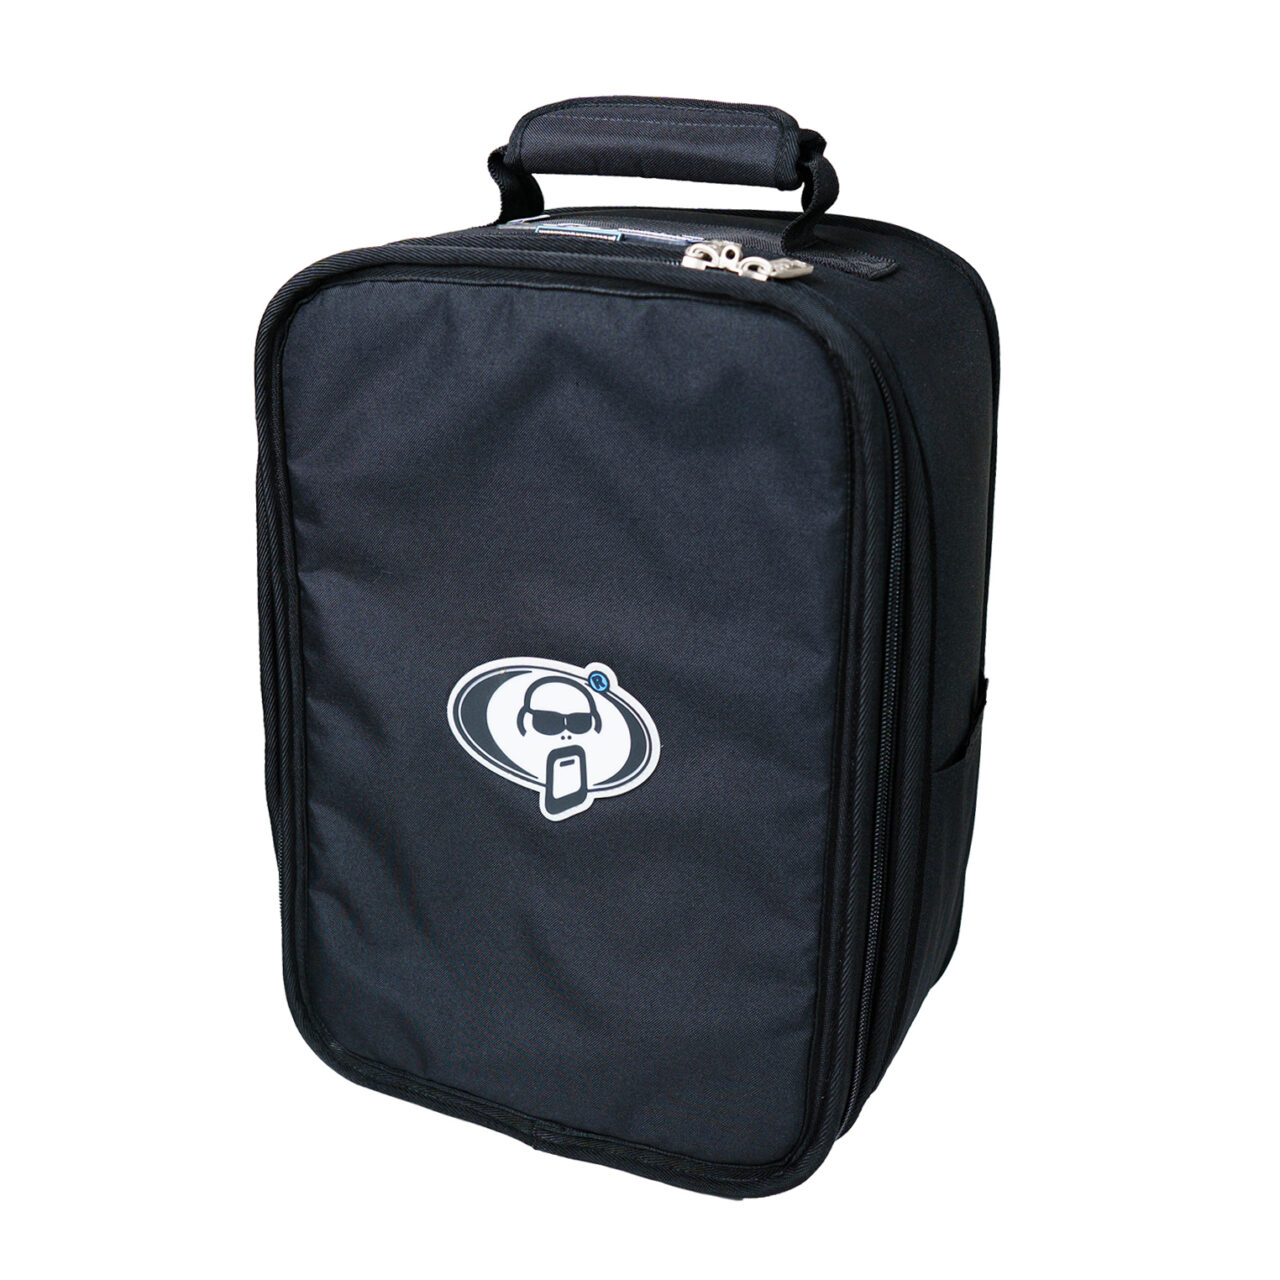 PROTECTION racket 9280-47